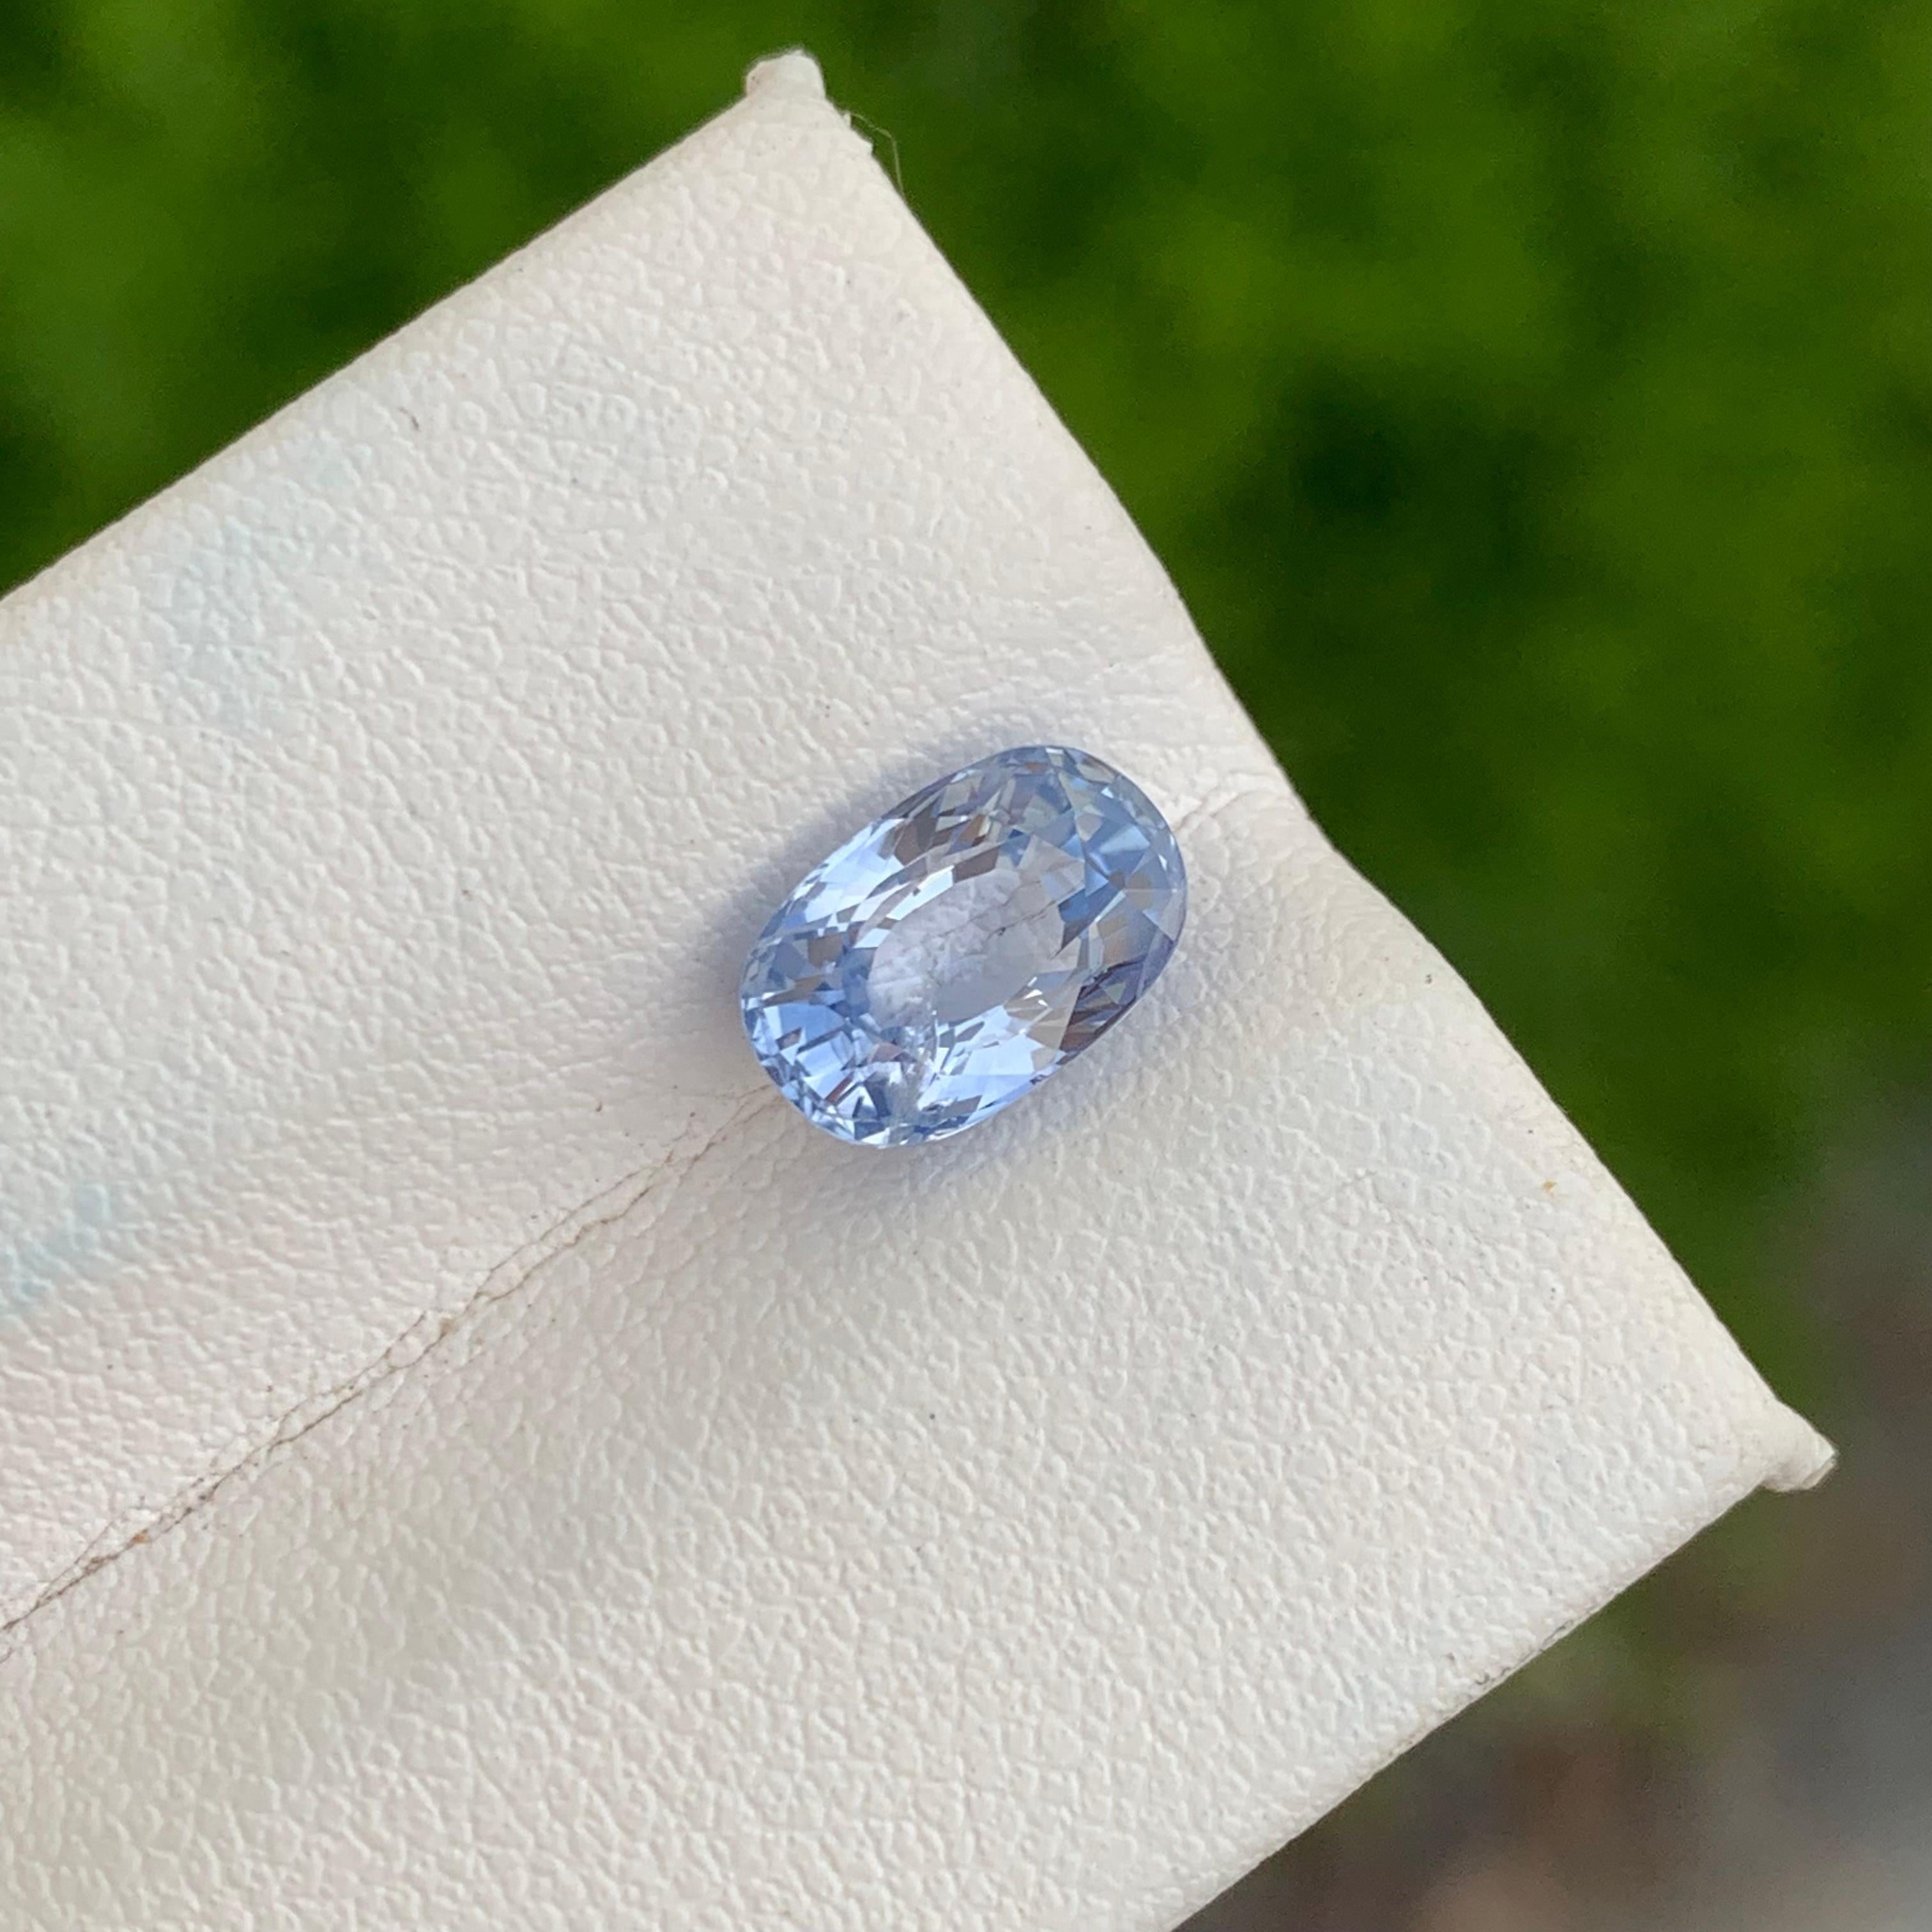 Loose Sapphire 
Weight: 2.45 Carats 
Dimension: 9.1x6x4.7 Mm
Origin: Srilanka
Shape: Oval
Color: Blue
Treatment: Non / Natural 
Certificate: On Client Demand 
Blue sapphire, a captivating and prestigious gemstone, is renowned for its vivid and